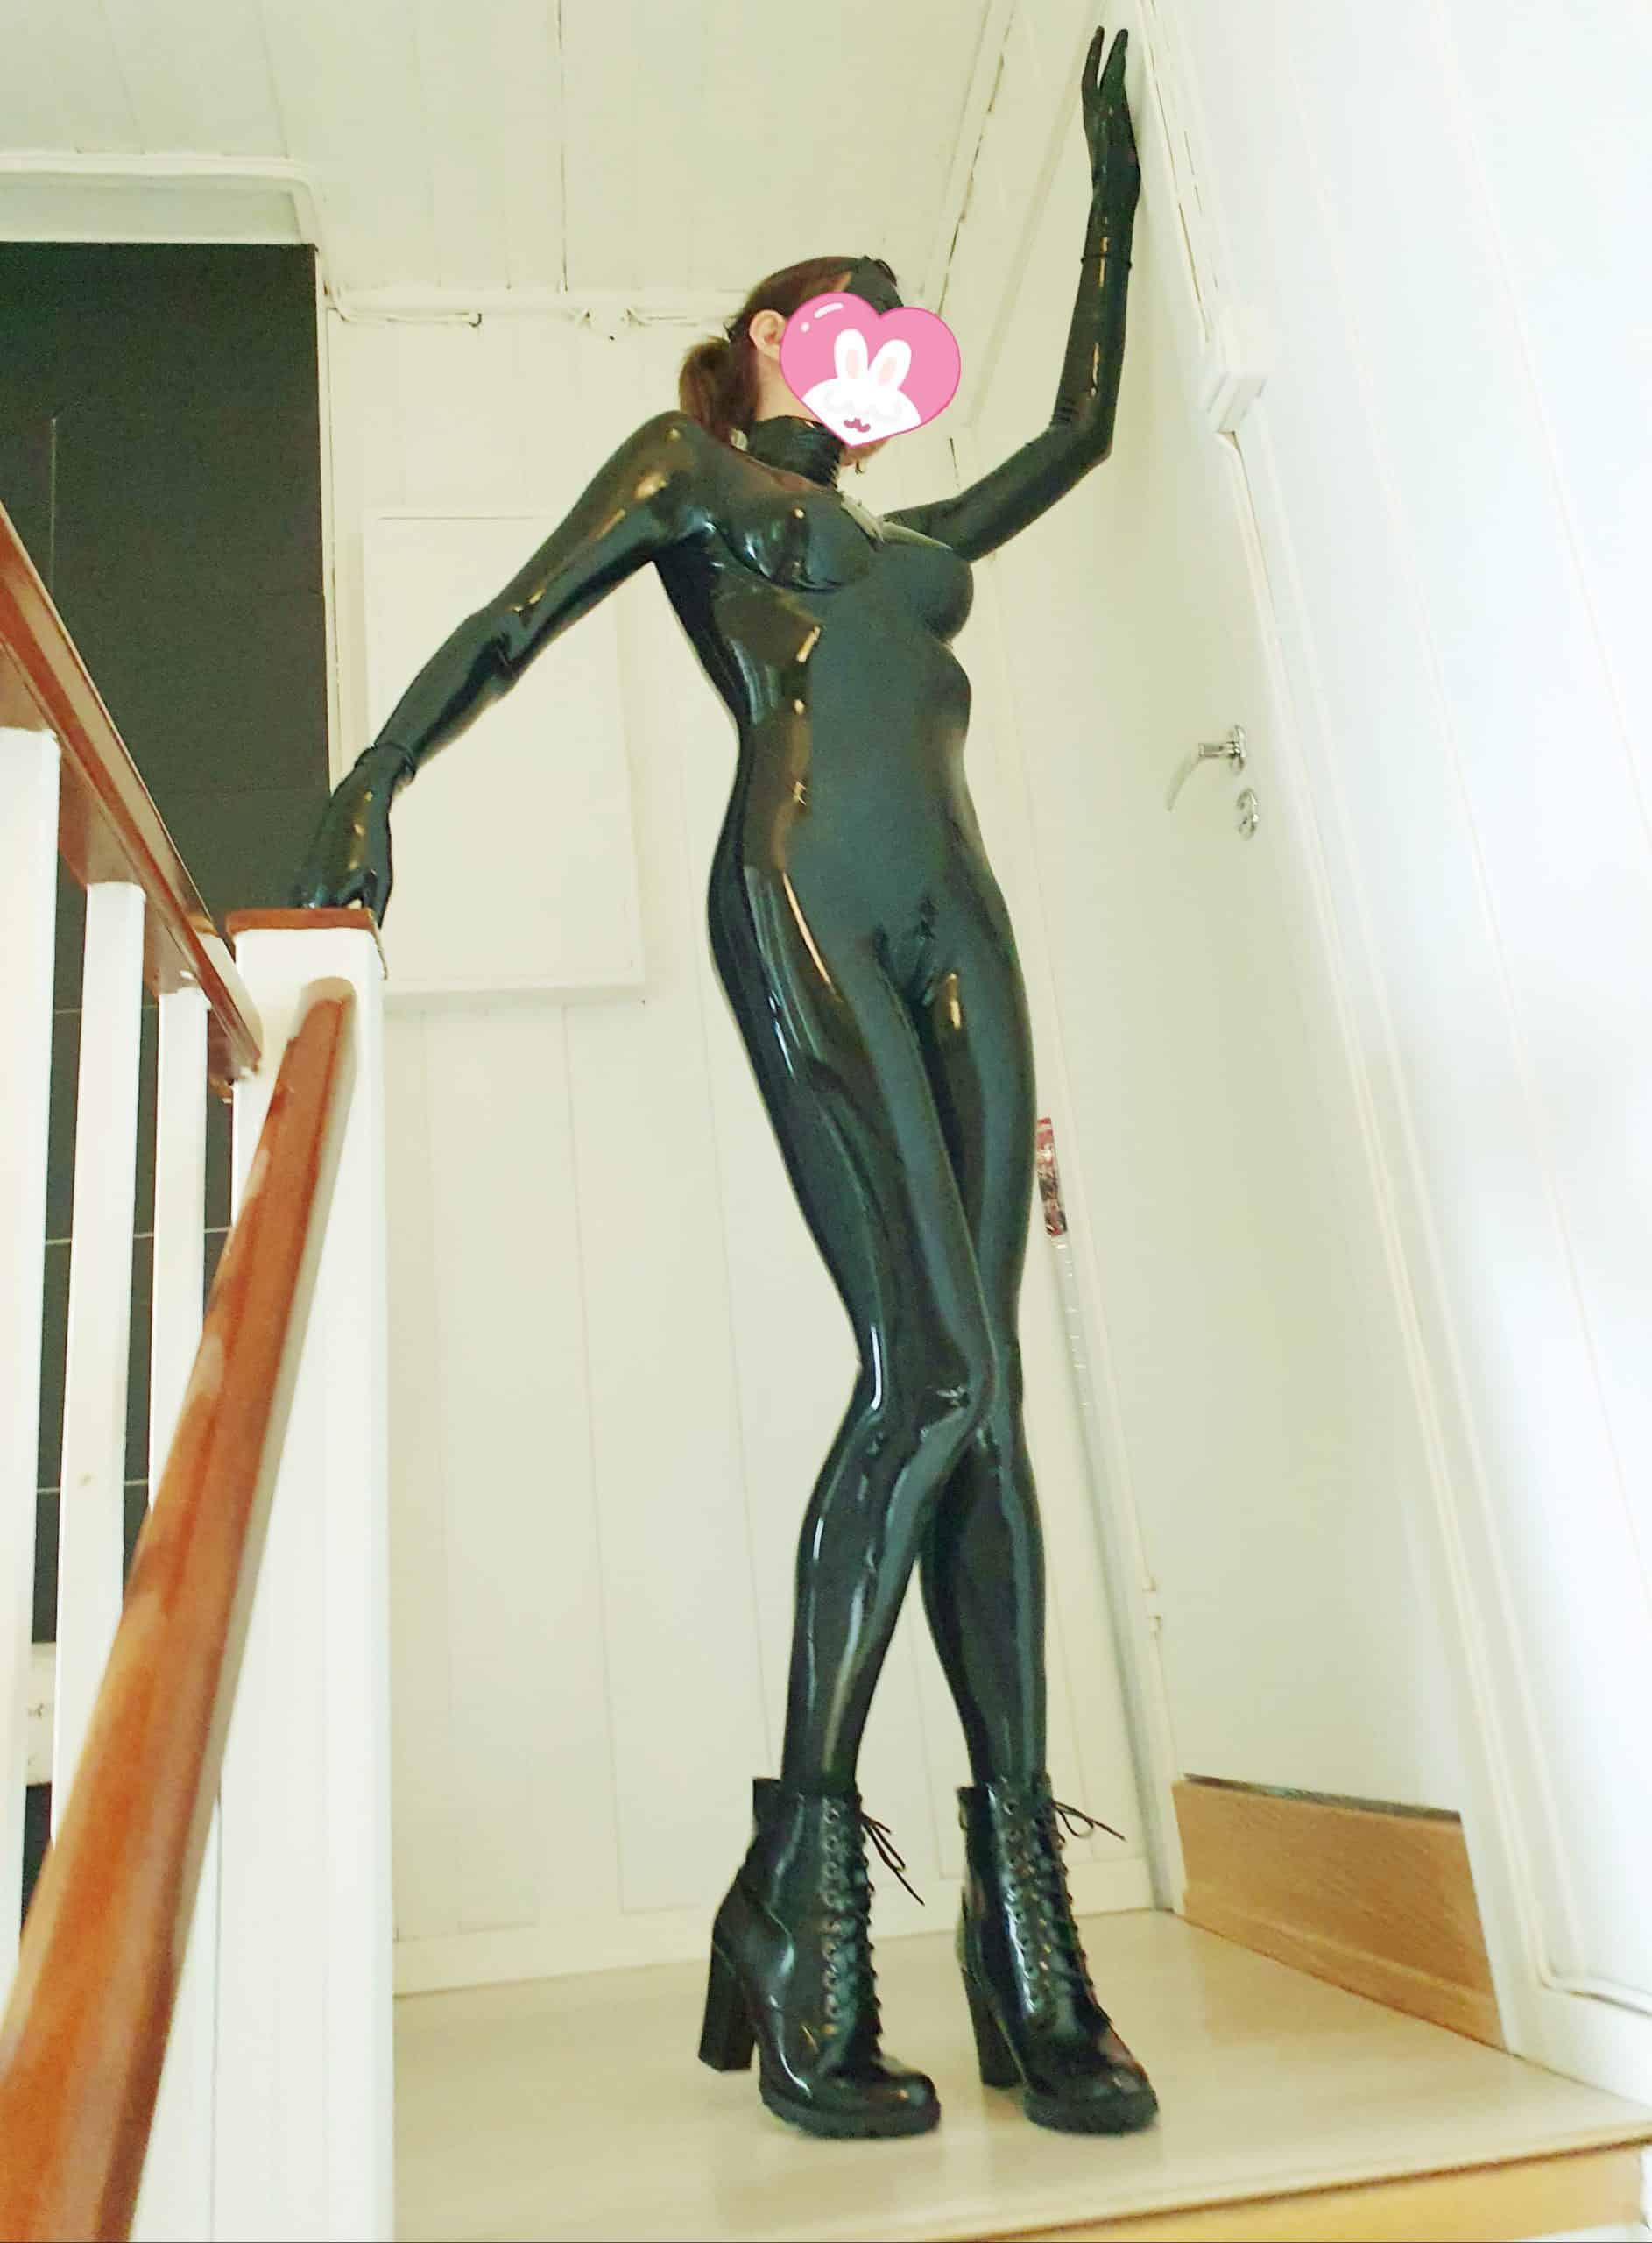 Lady in latex catsuit